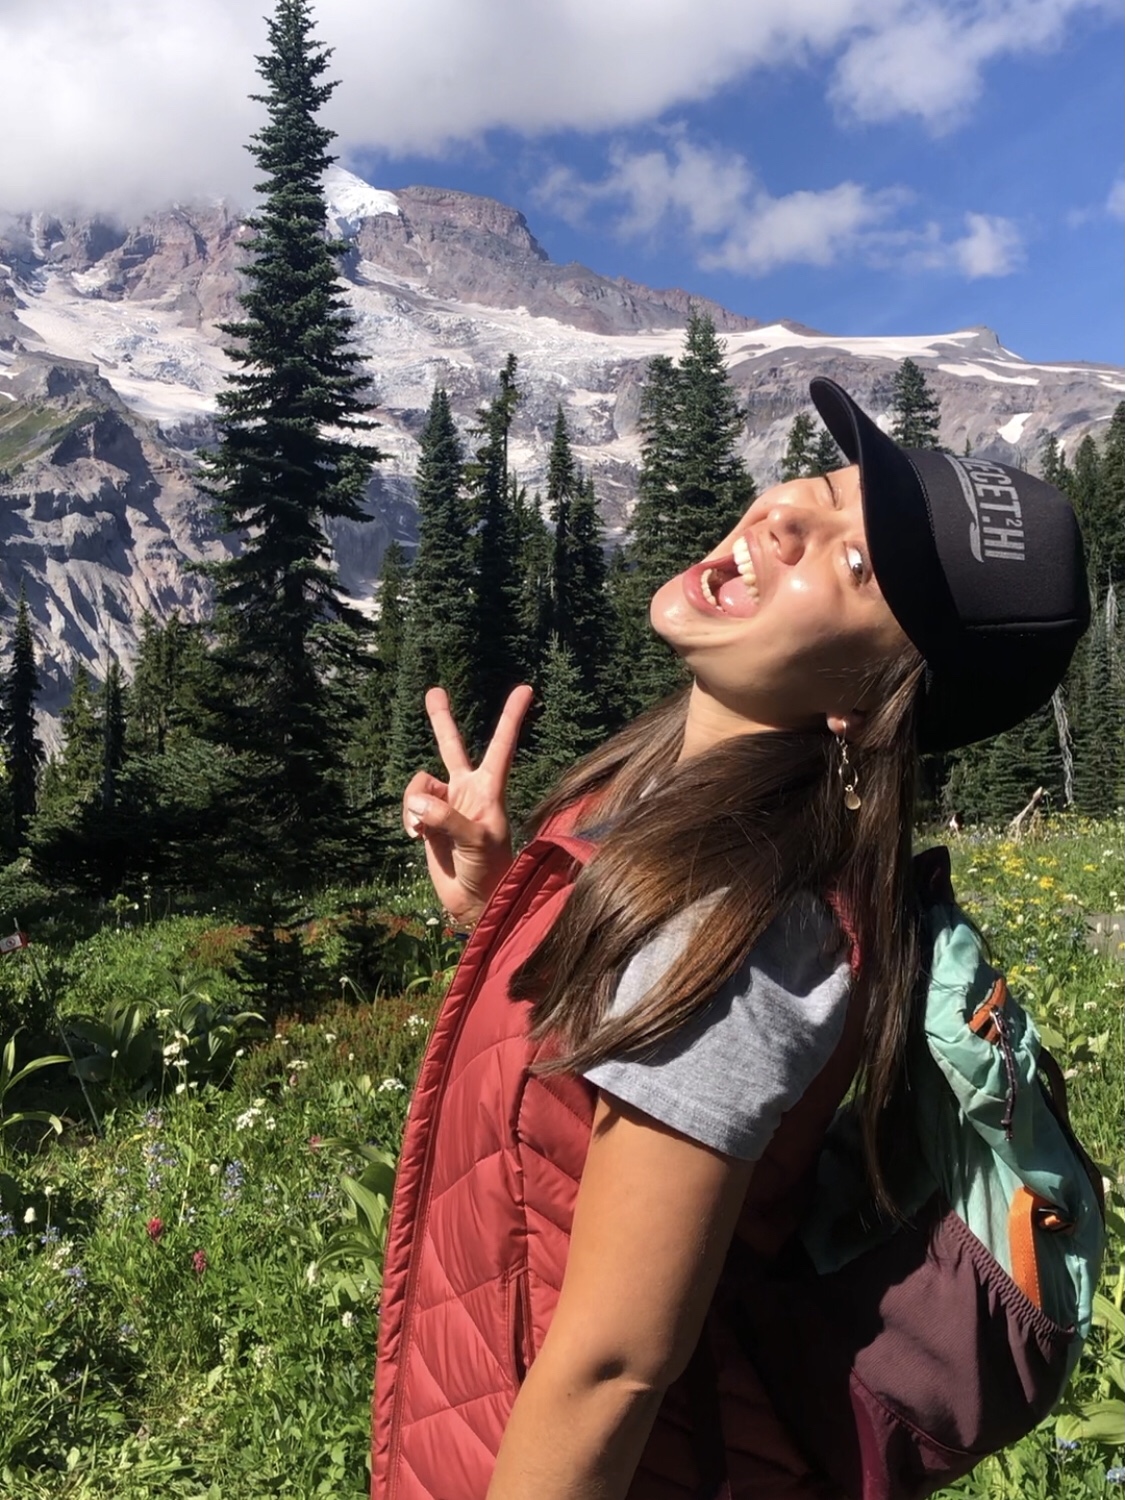 Annalise, a young woman with long brown hair, is winking and smiling at the camera, and making a peace sign with her hands. She is outdoors in front of some pine trees and a snow-covered mountain. 